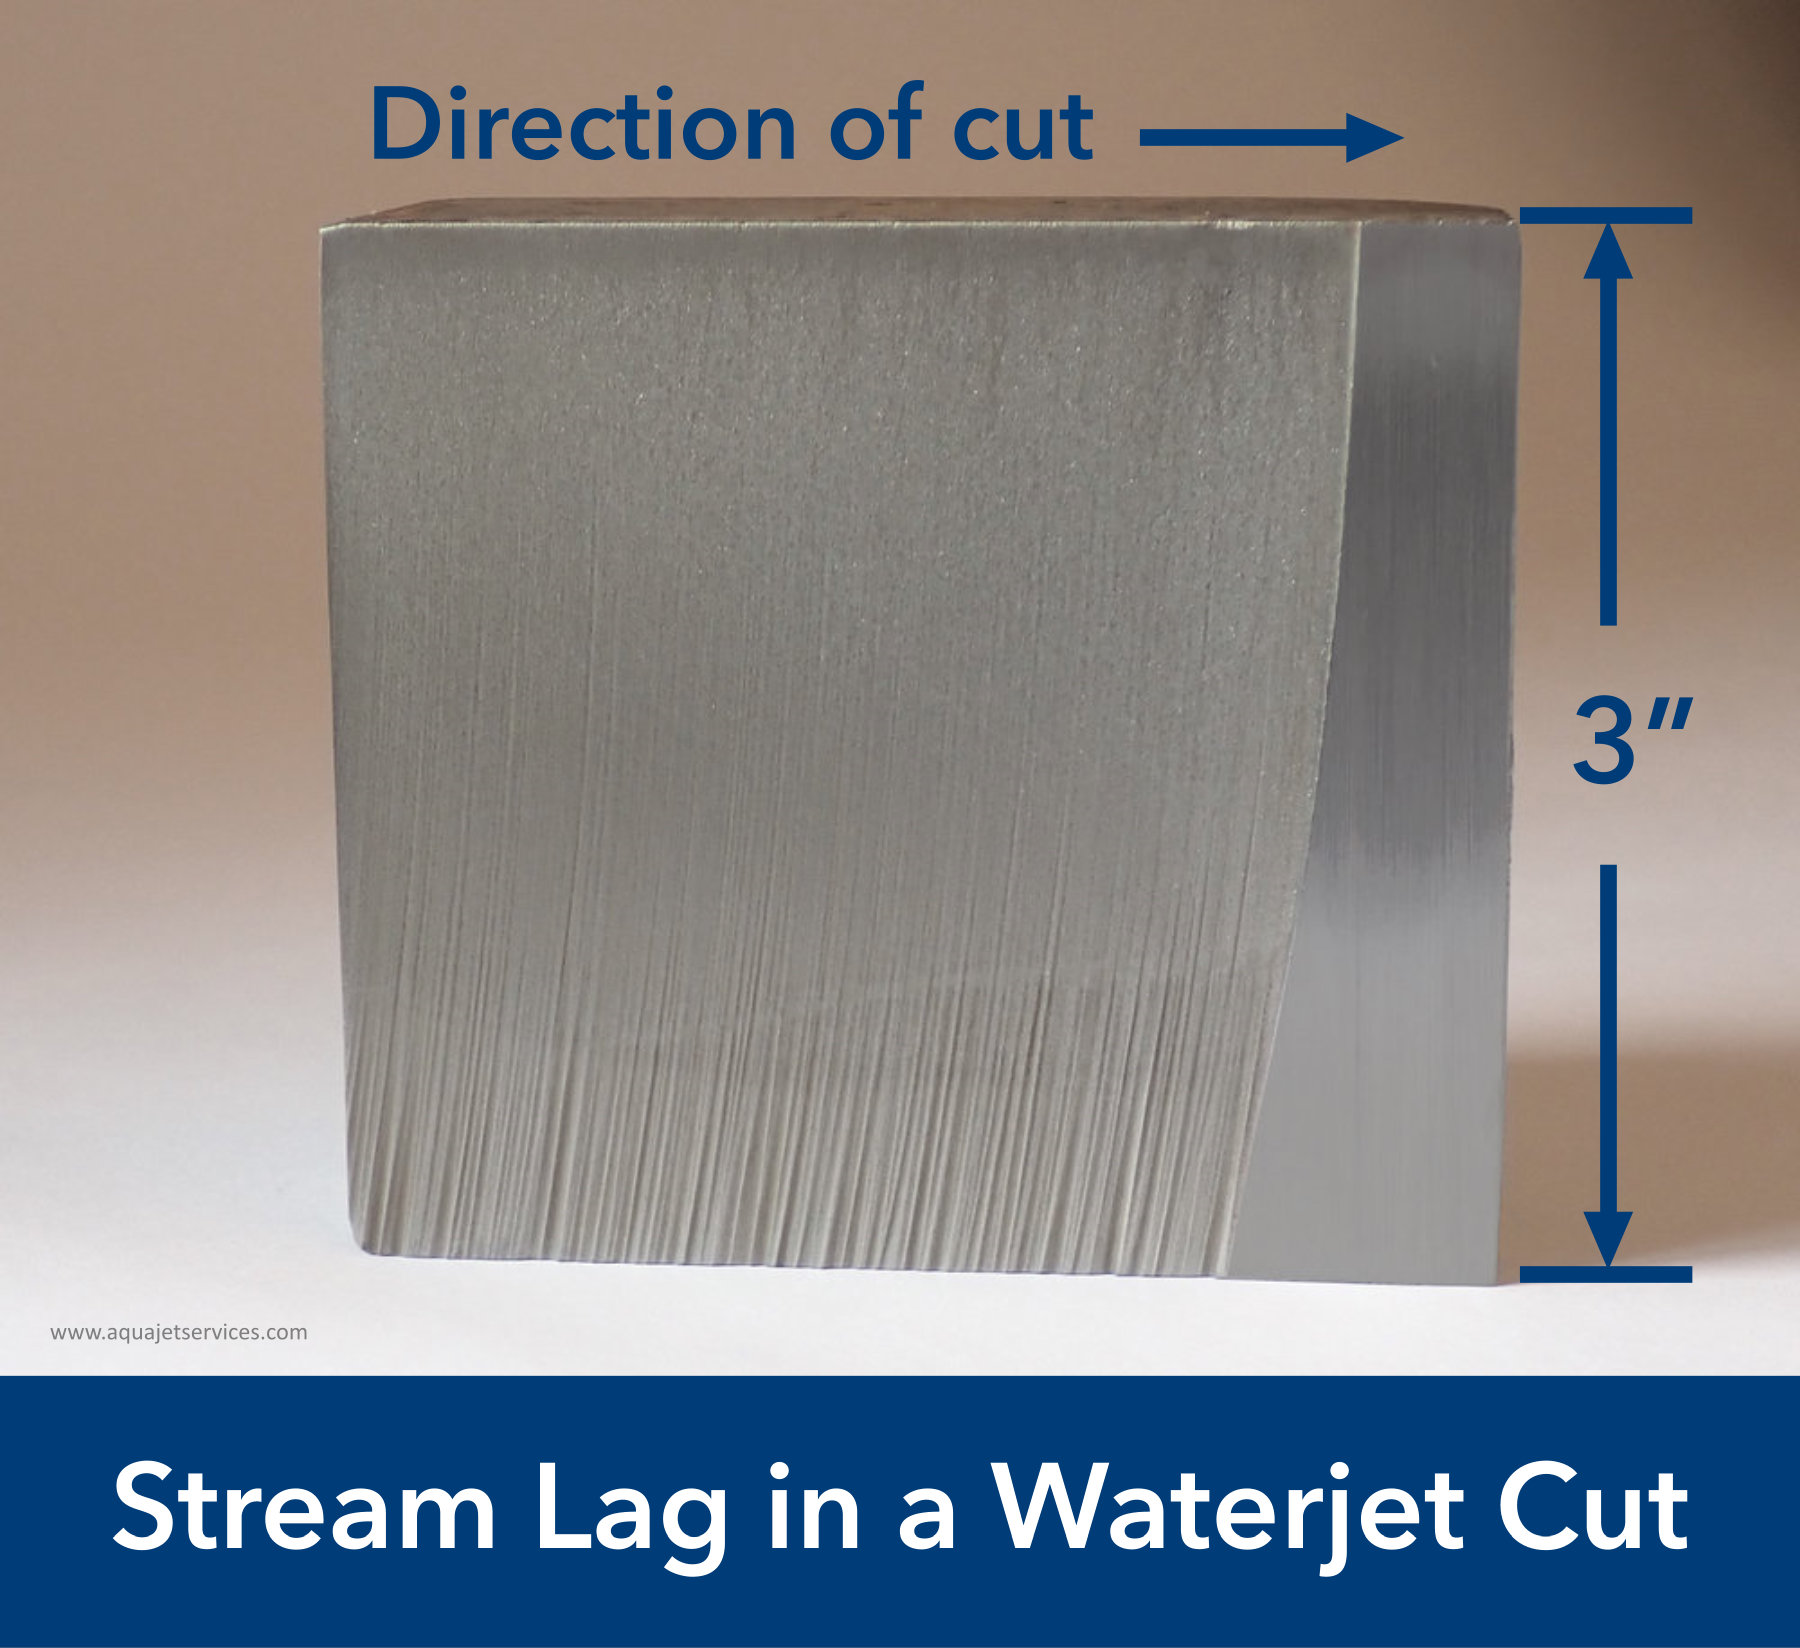 Characteristics of Waterjet Cutting, A Technical Guide to Waterjet Cutting